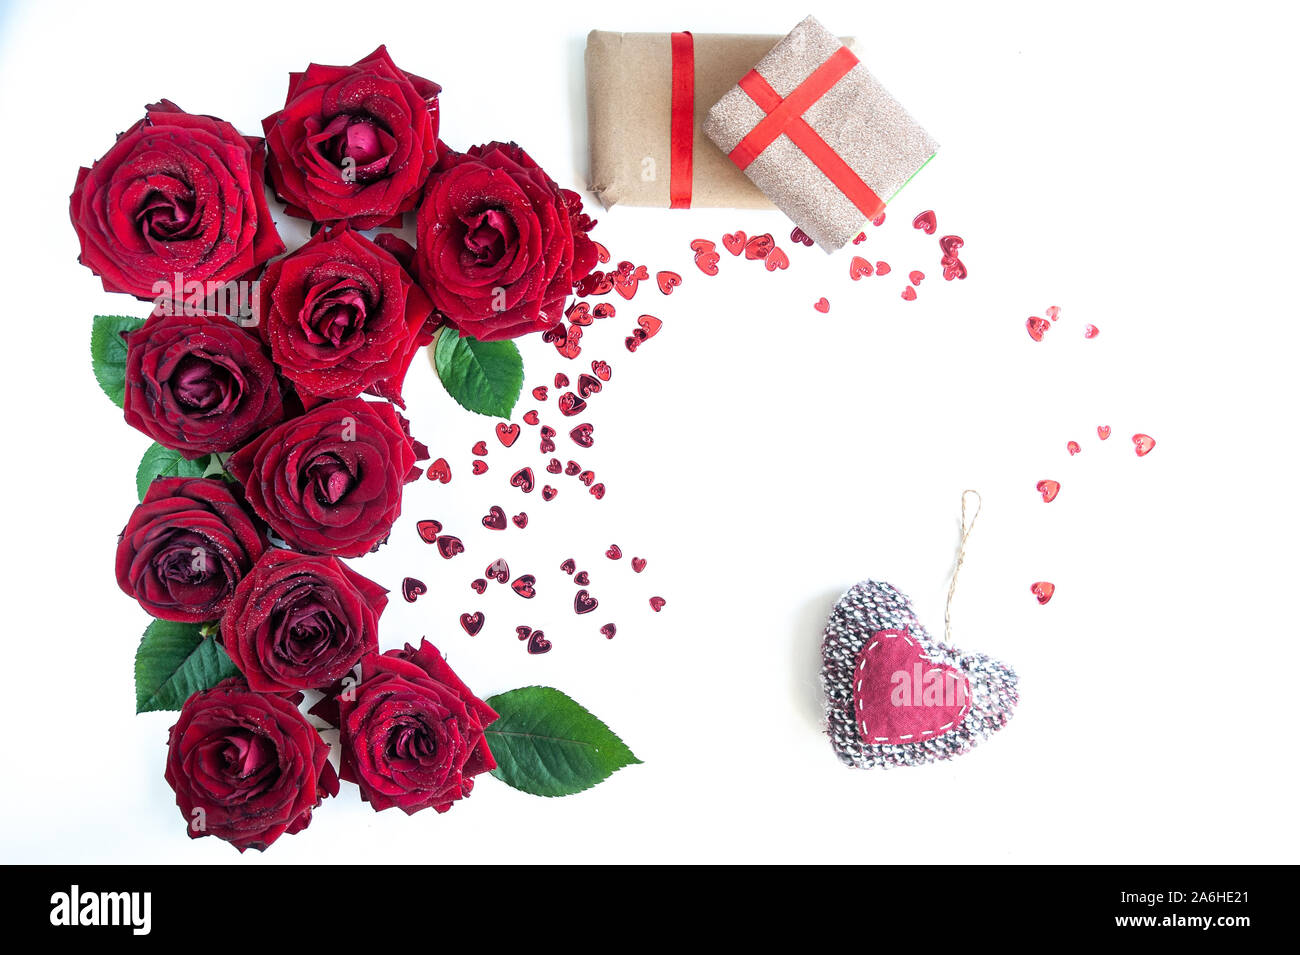 Flat Lay Background, flower pattern, Valentine's Day, the theme of lovers. Red roses and gifts with ribbons on a white background, isolated Stock Photo